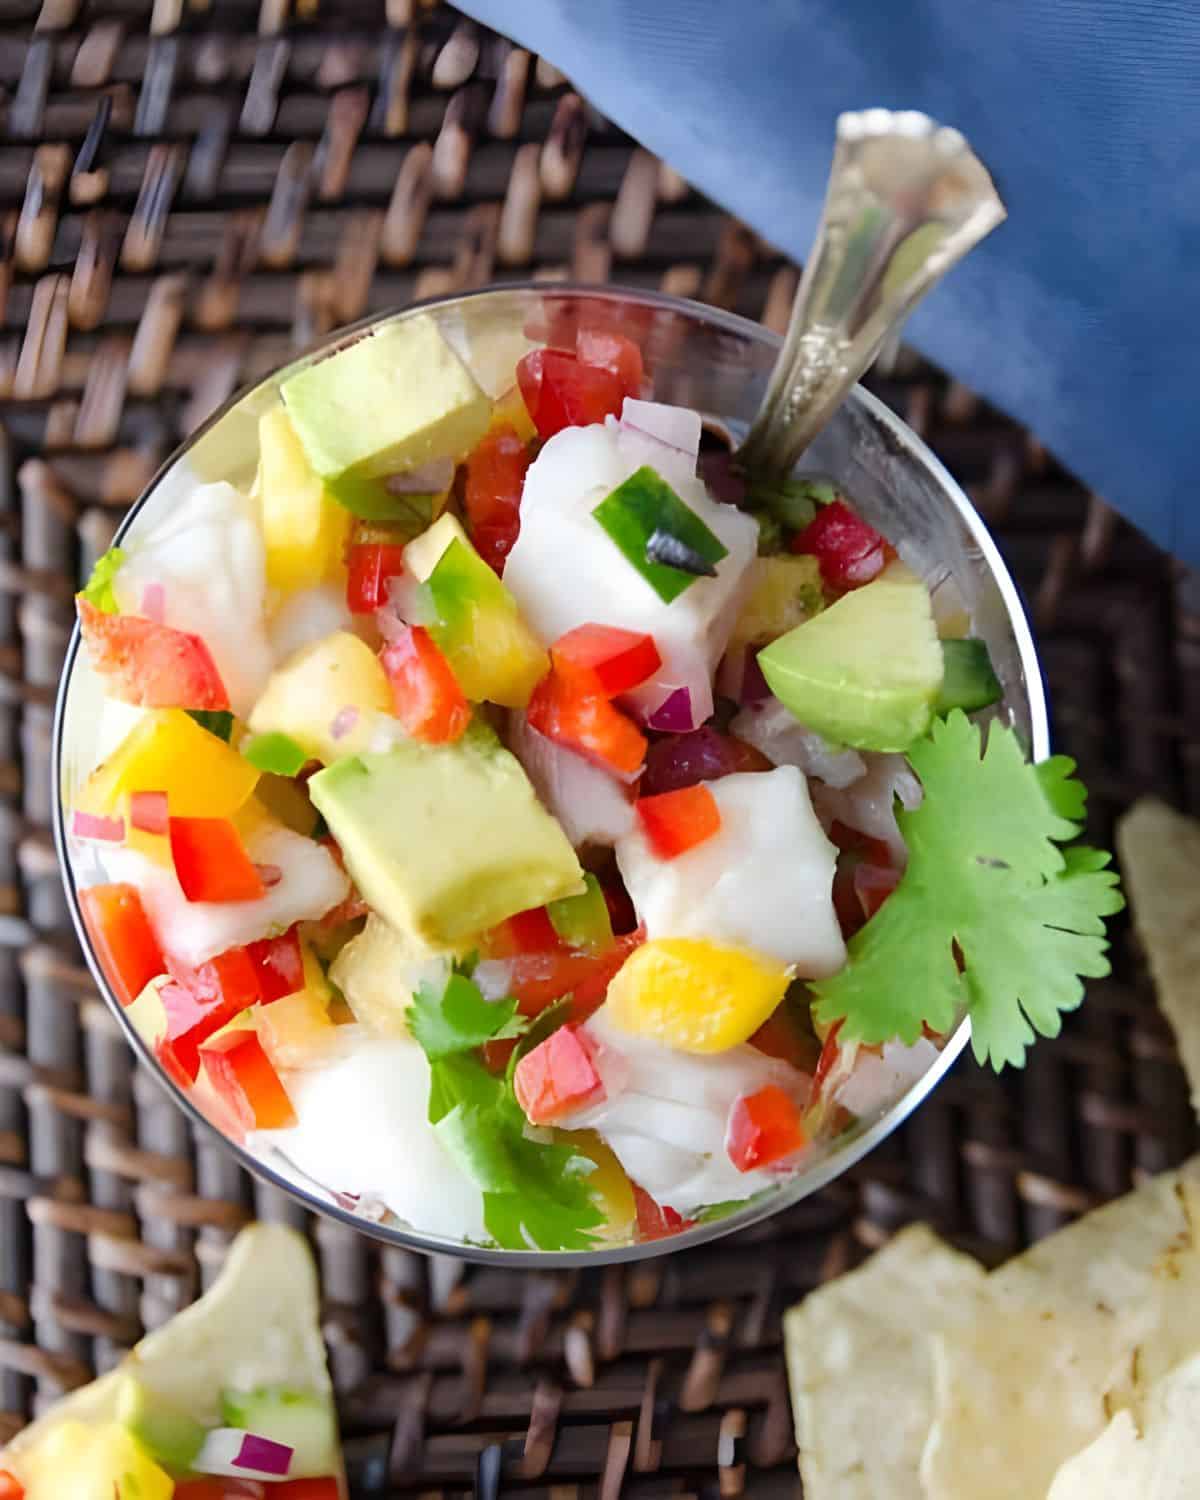 A serving of snapper ceviche.